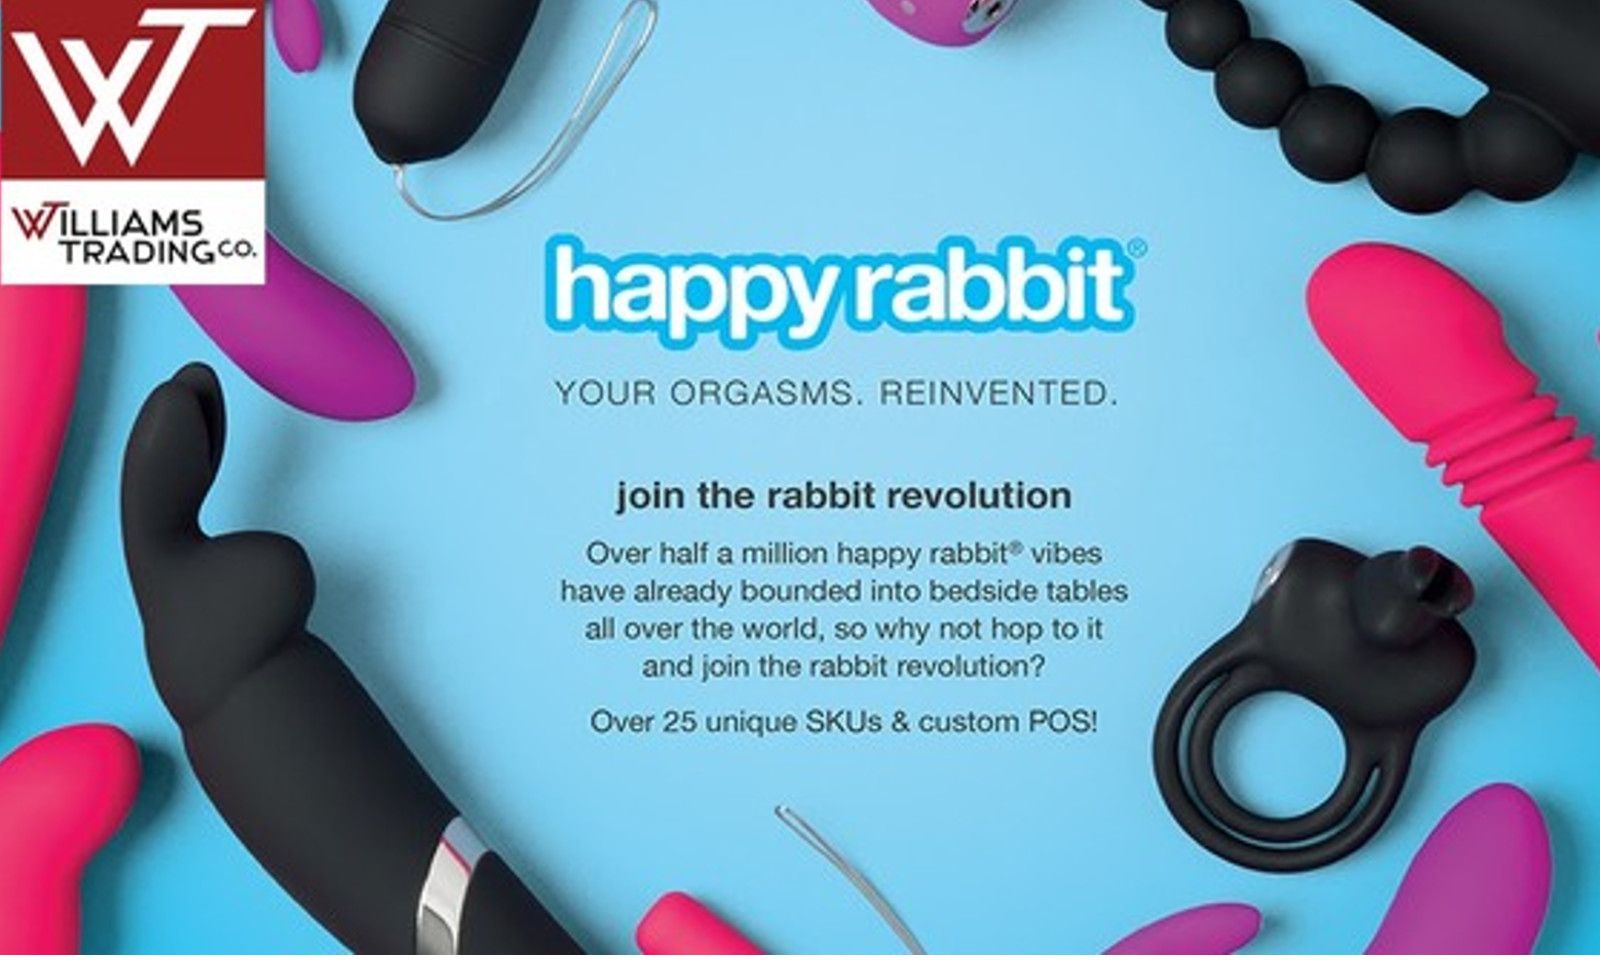 Williams Trading Co. and Lovehoney Launch Promo for Happy Rabbit